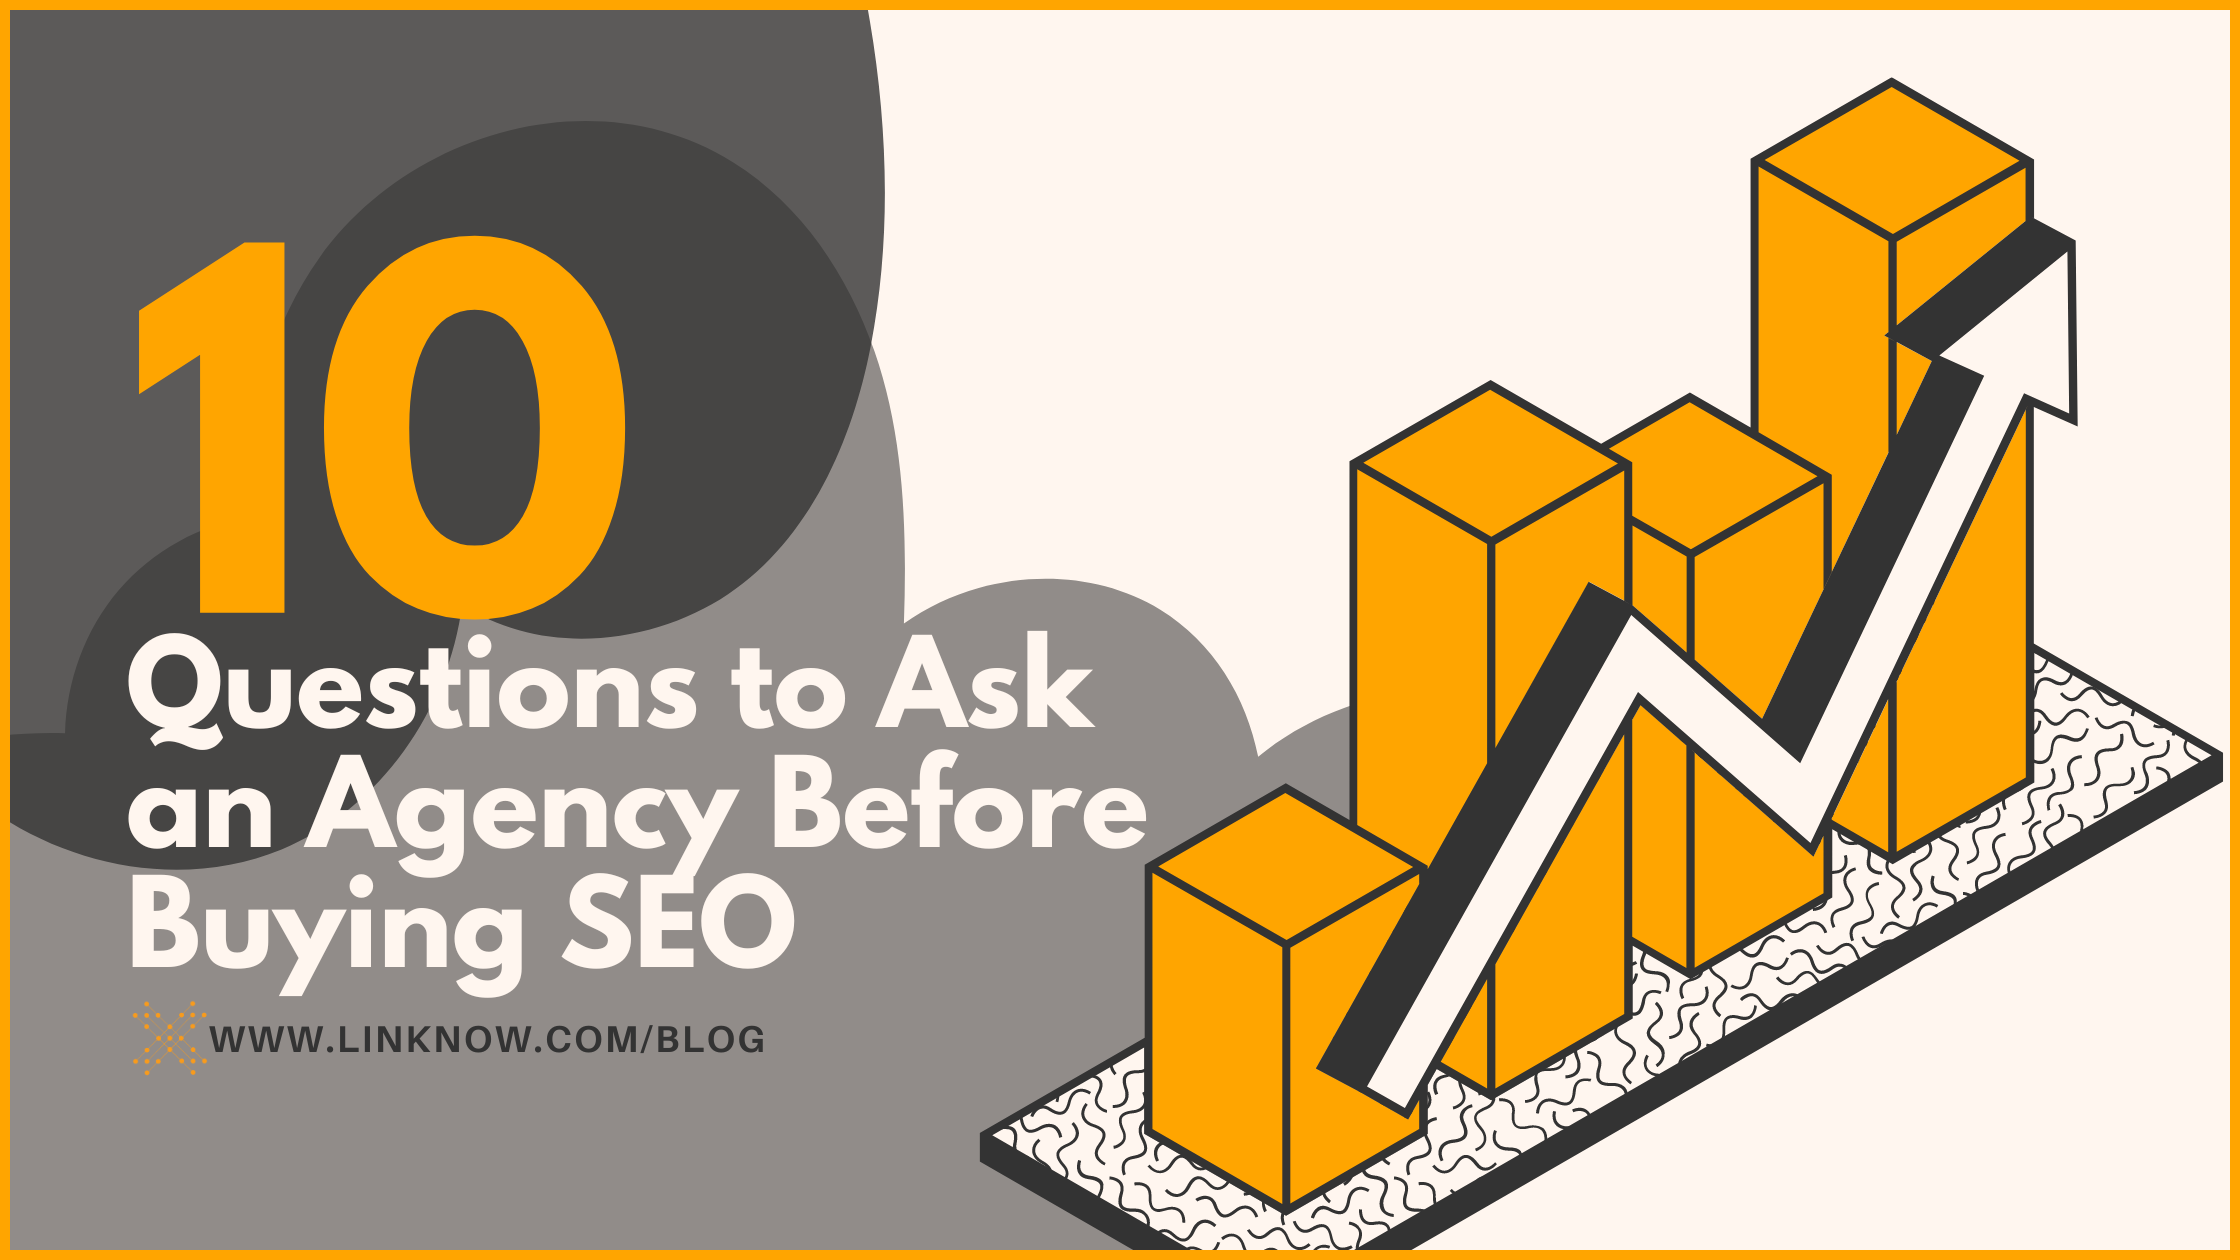 10 Questions to Ask an Agency Before Buying SEO